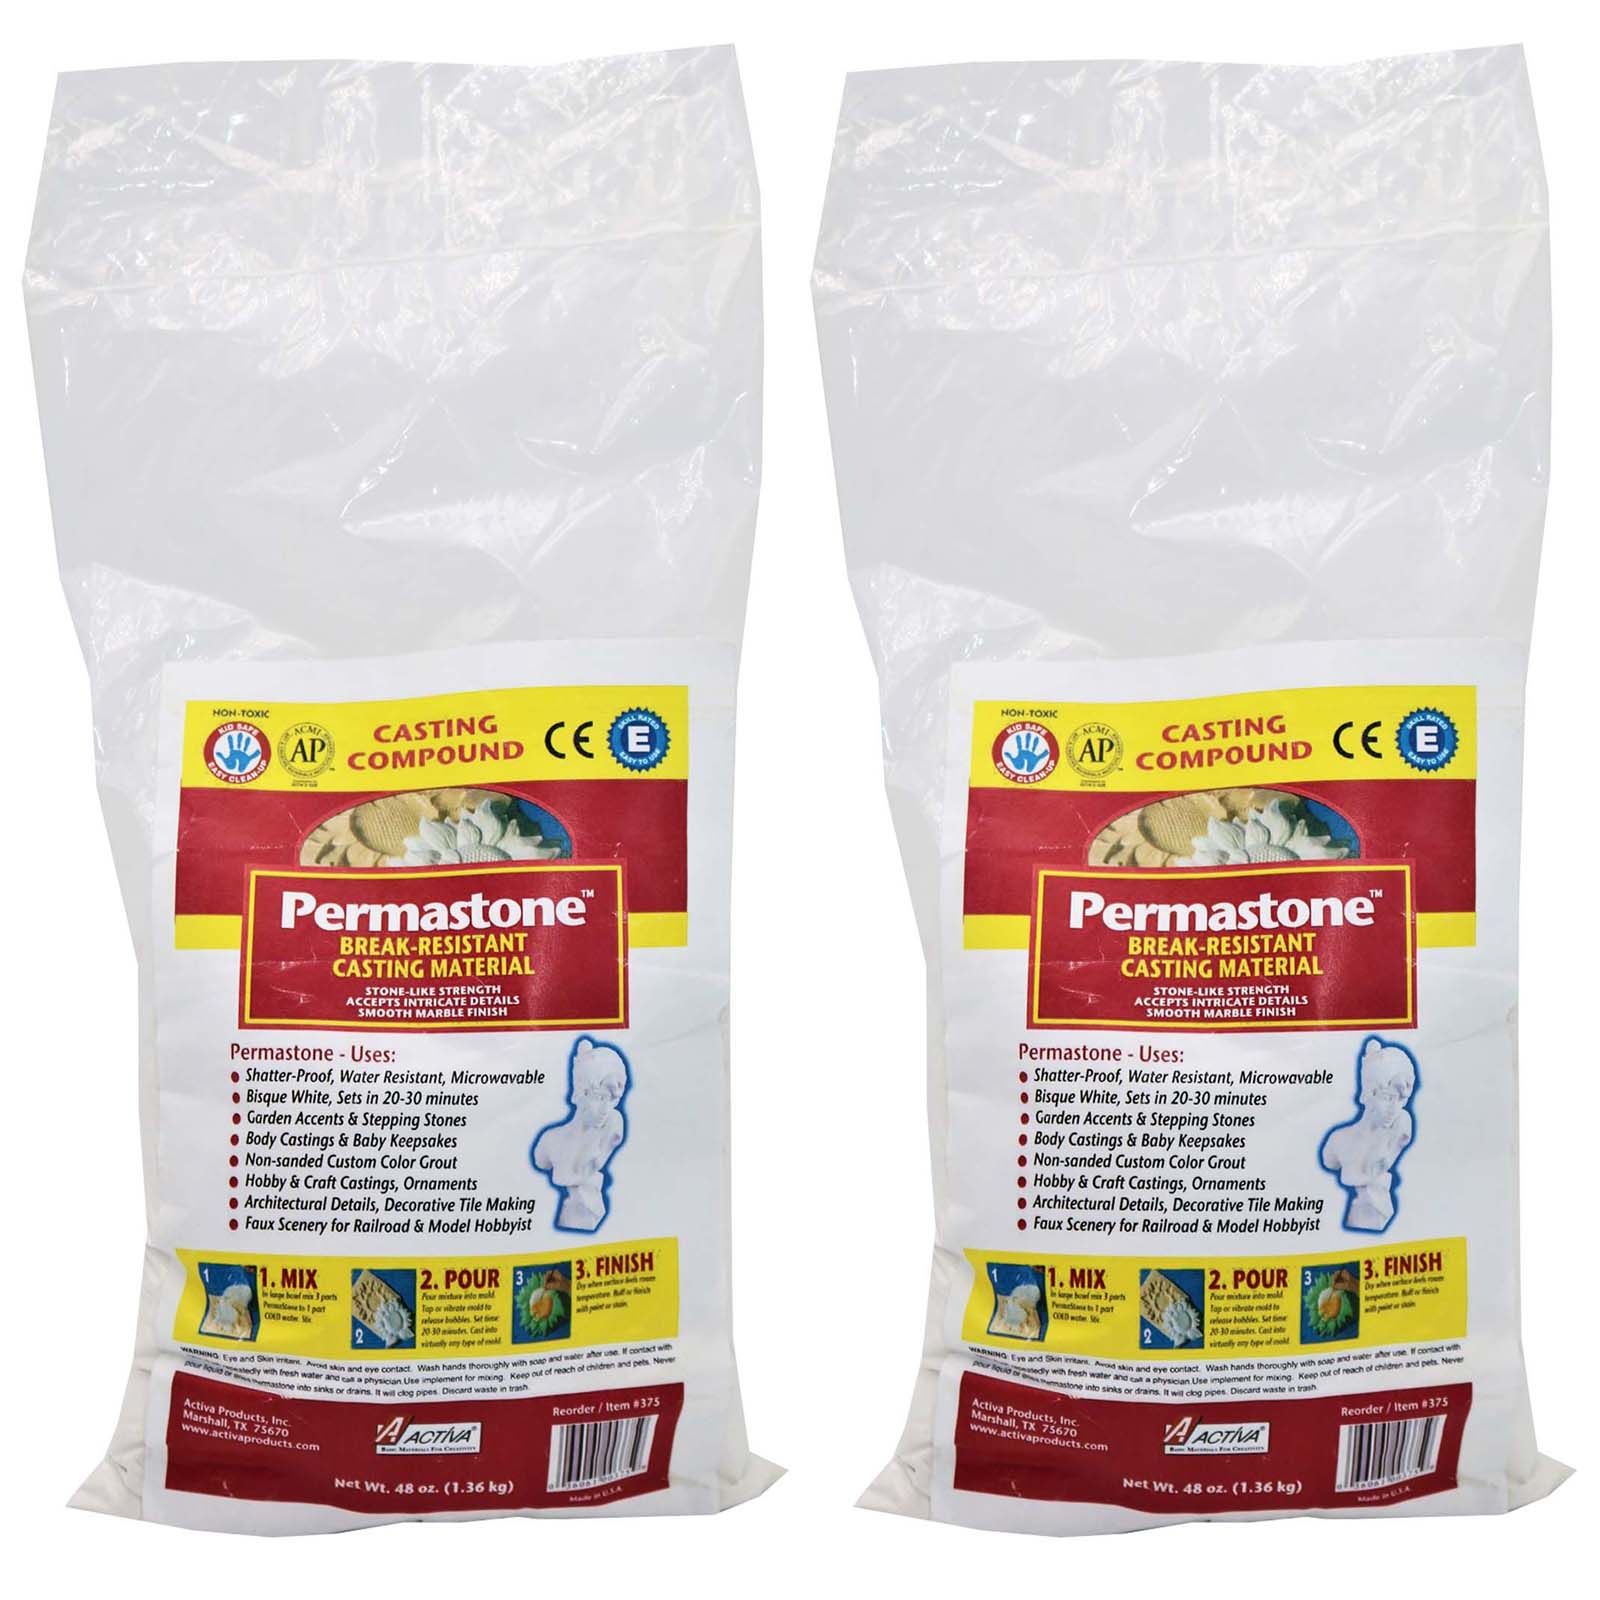 PermaStone Casting Compound, 48 oz., Pack of 2